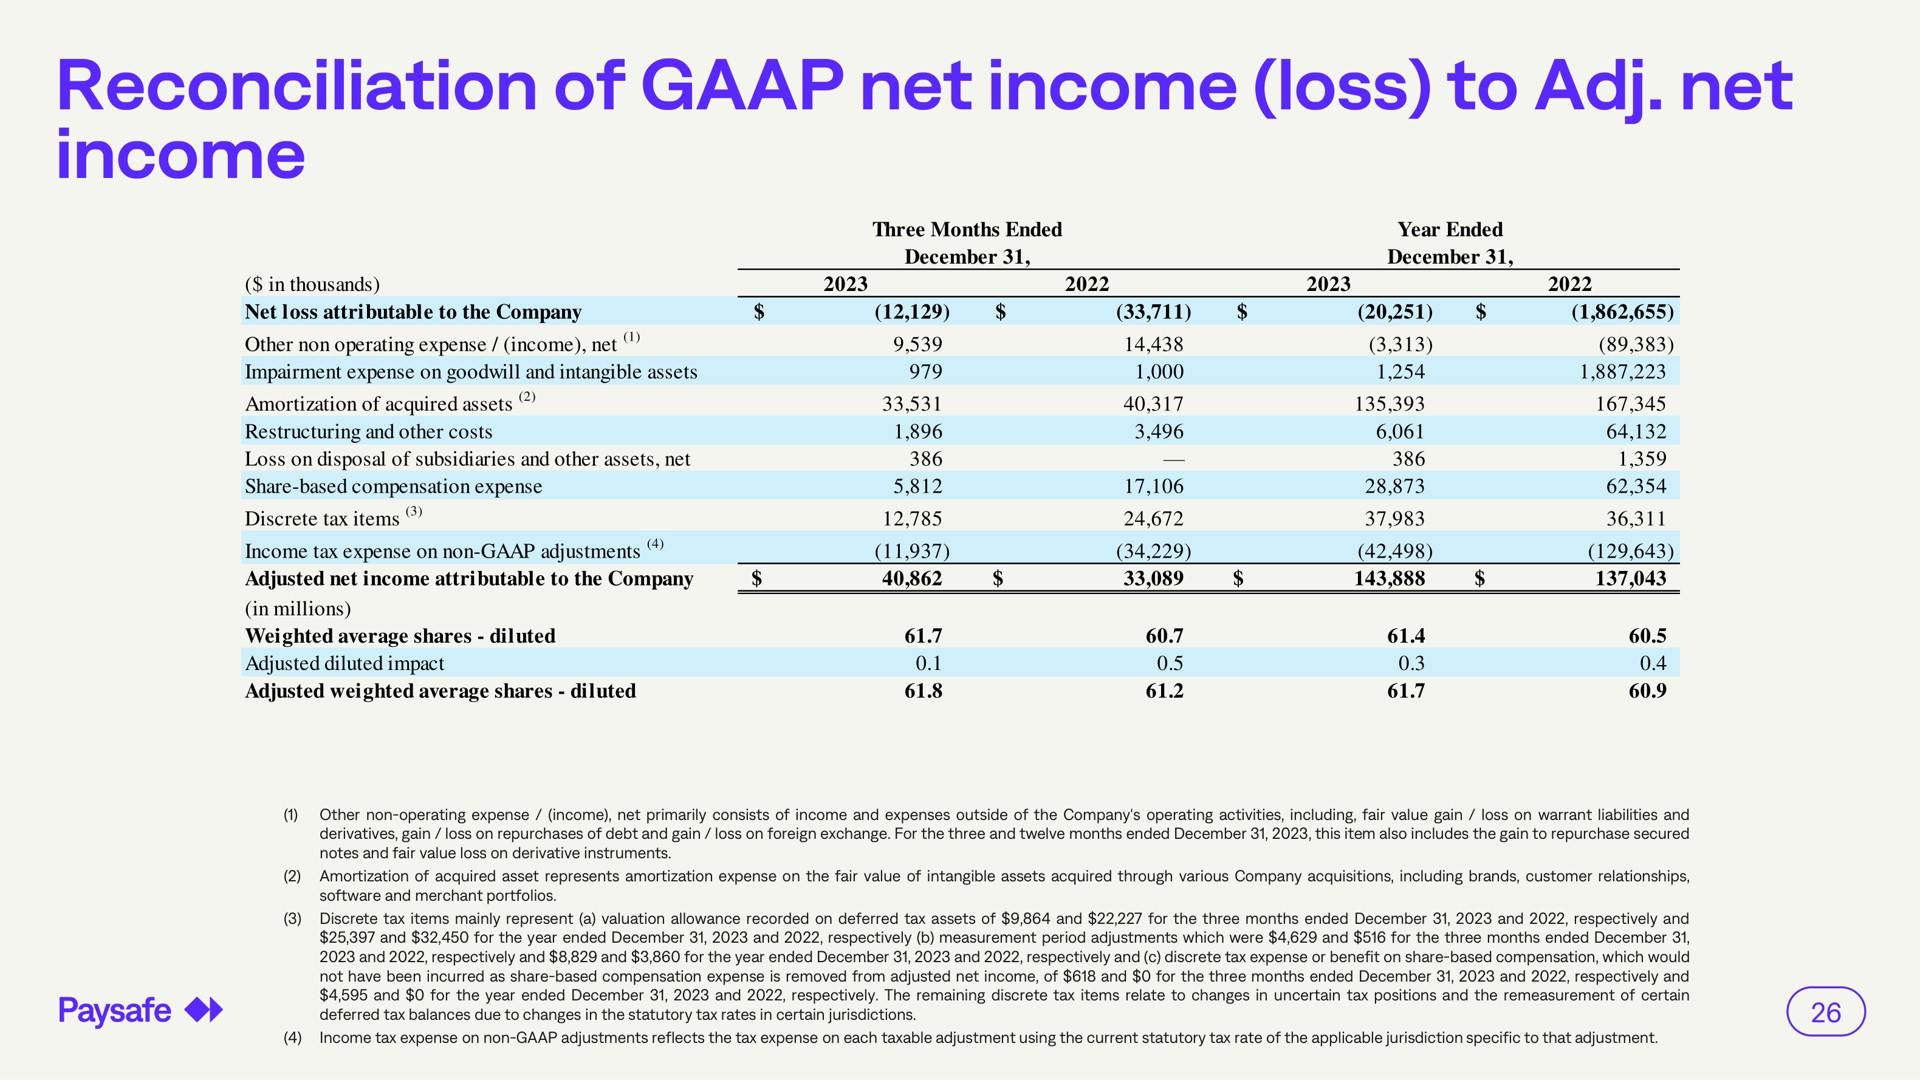 reconciliation of net income loss to net income | Paysafe